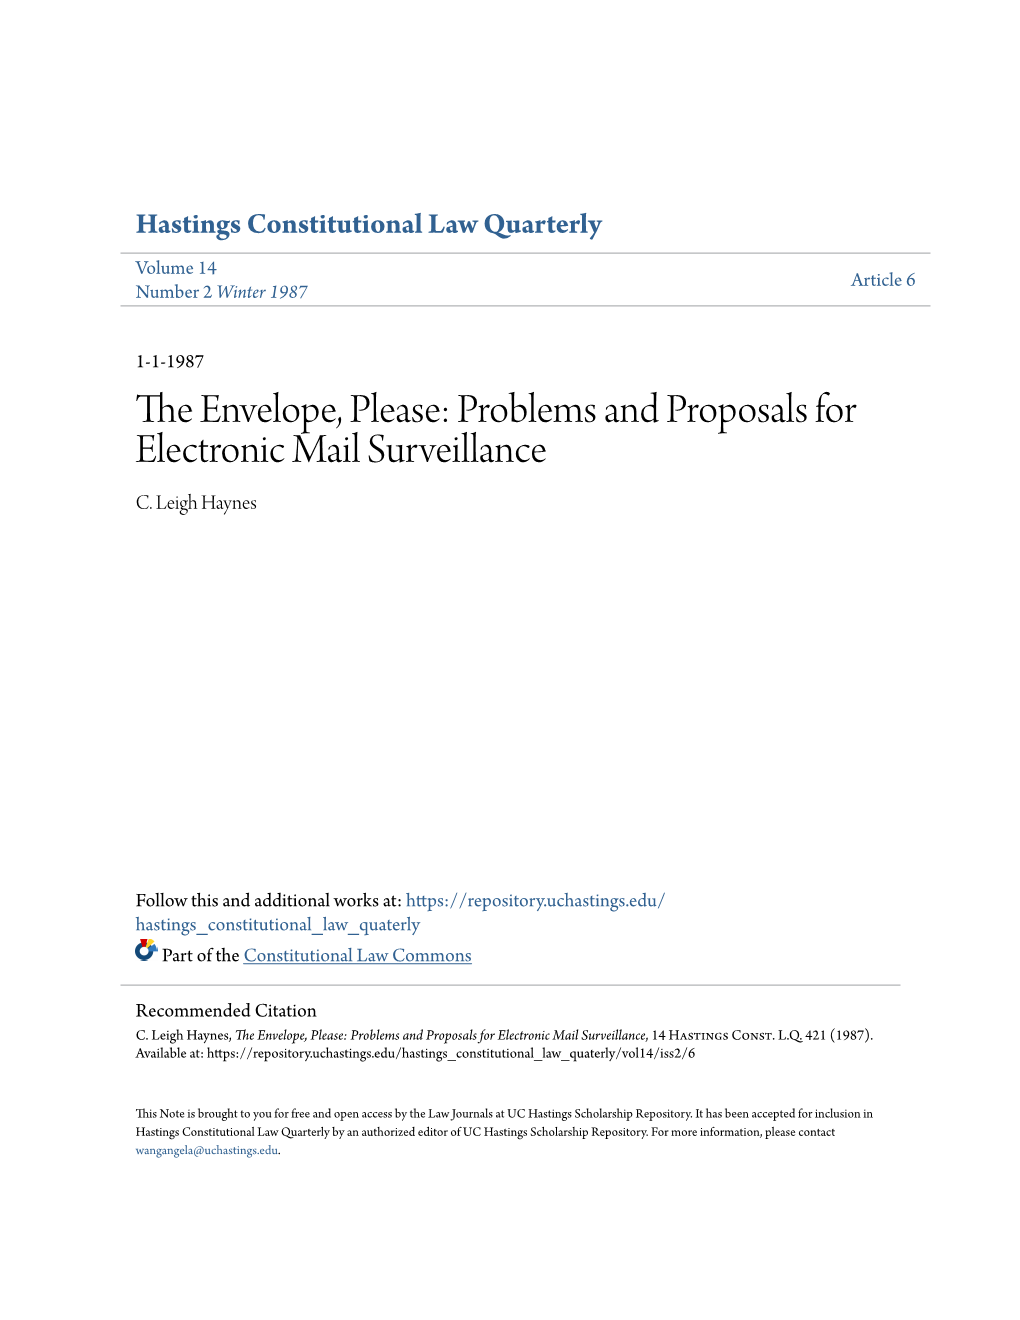 The Envelope, Please: Problems and Proposals for Electronic Mail Surveillance, 14 Hastings Const